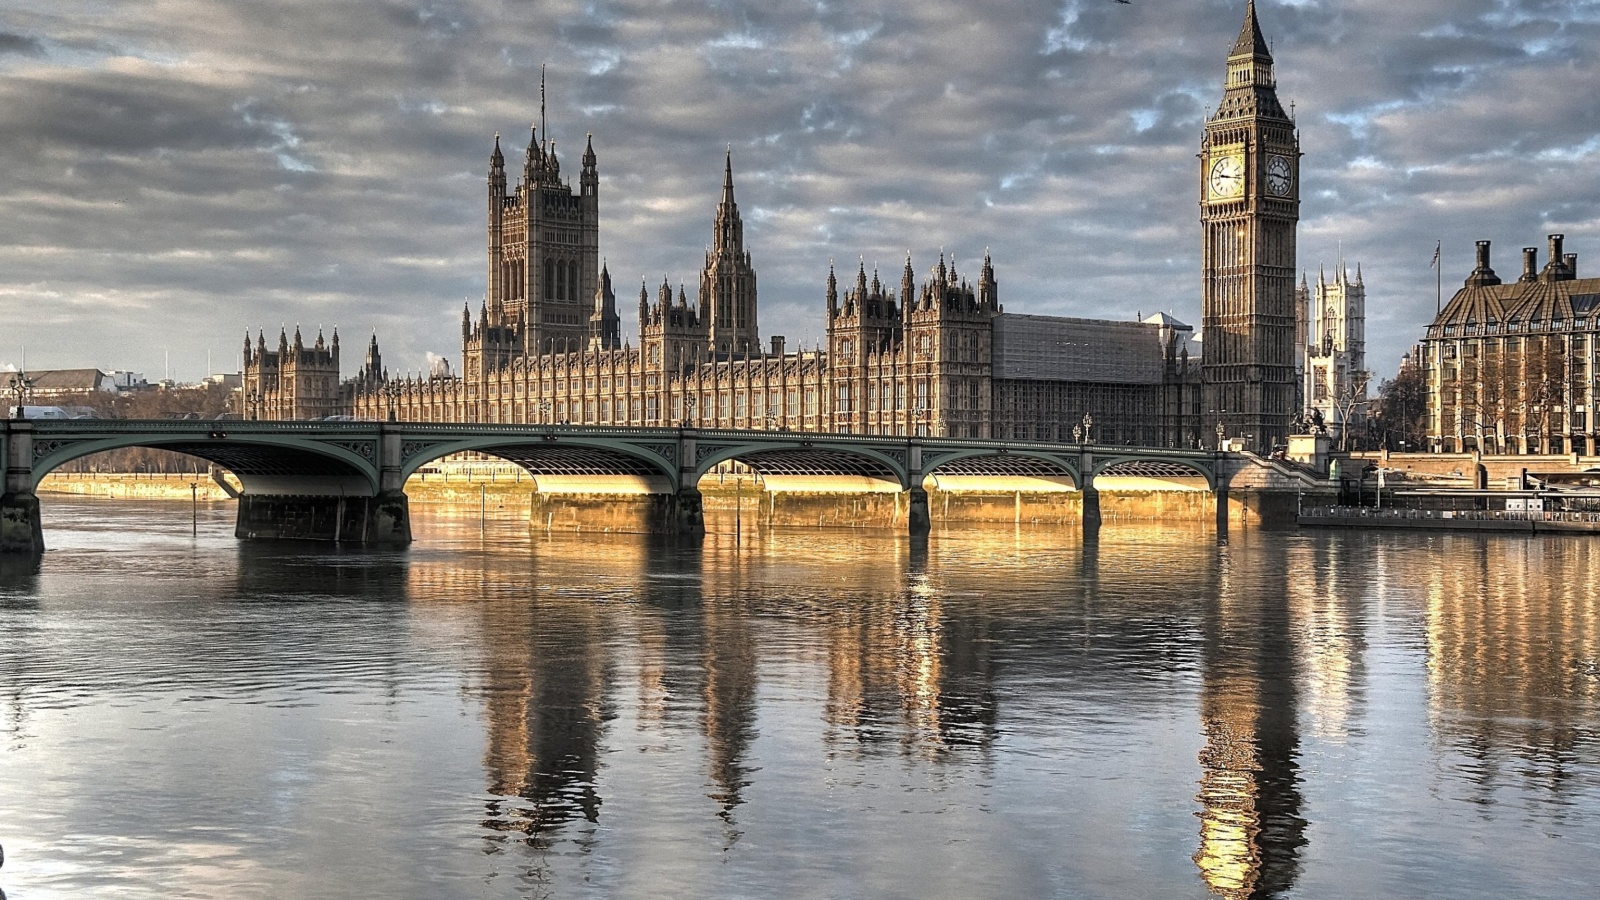 Das Palace of Westminster in London Wallpaper 1600x900